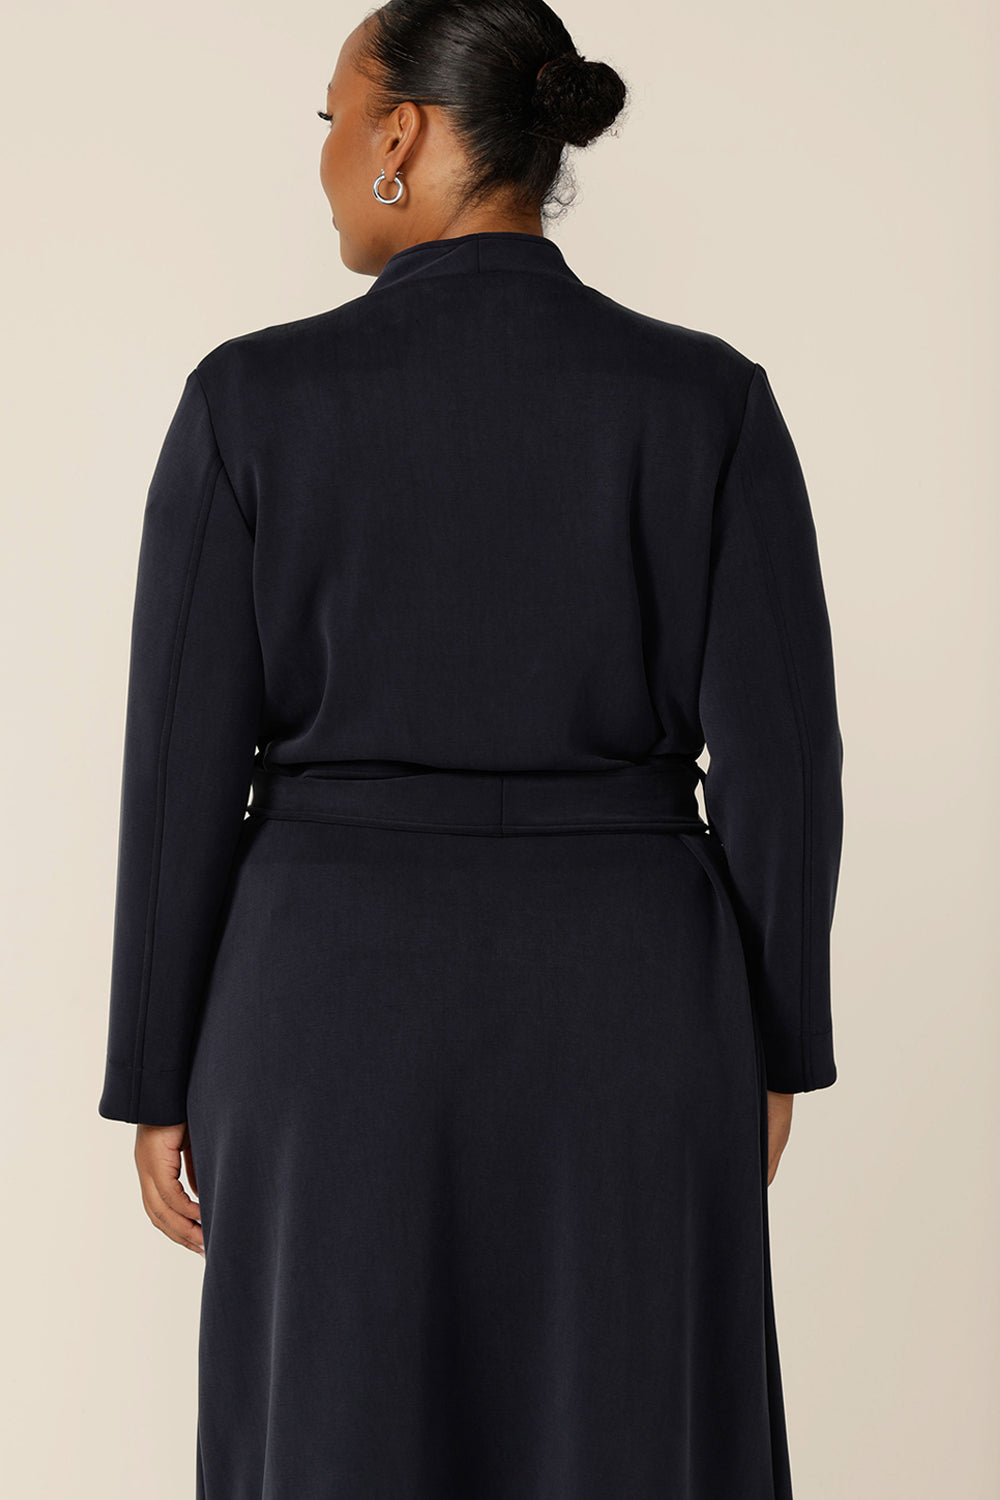 Back view of a size 18, plus size woman wearing the Marant Trenchcoat in Bluestone by Australian and New Zealand size inclusive clothing brand, L&F. A collarless, with tie belt at the waist and patch pockets is an easy coat for winter layering.